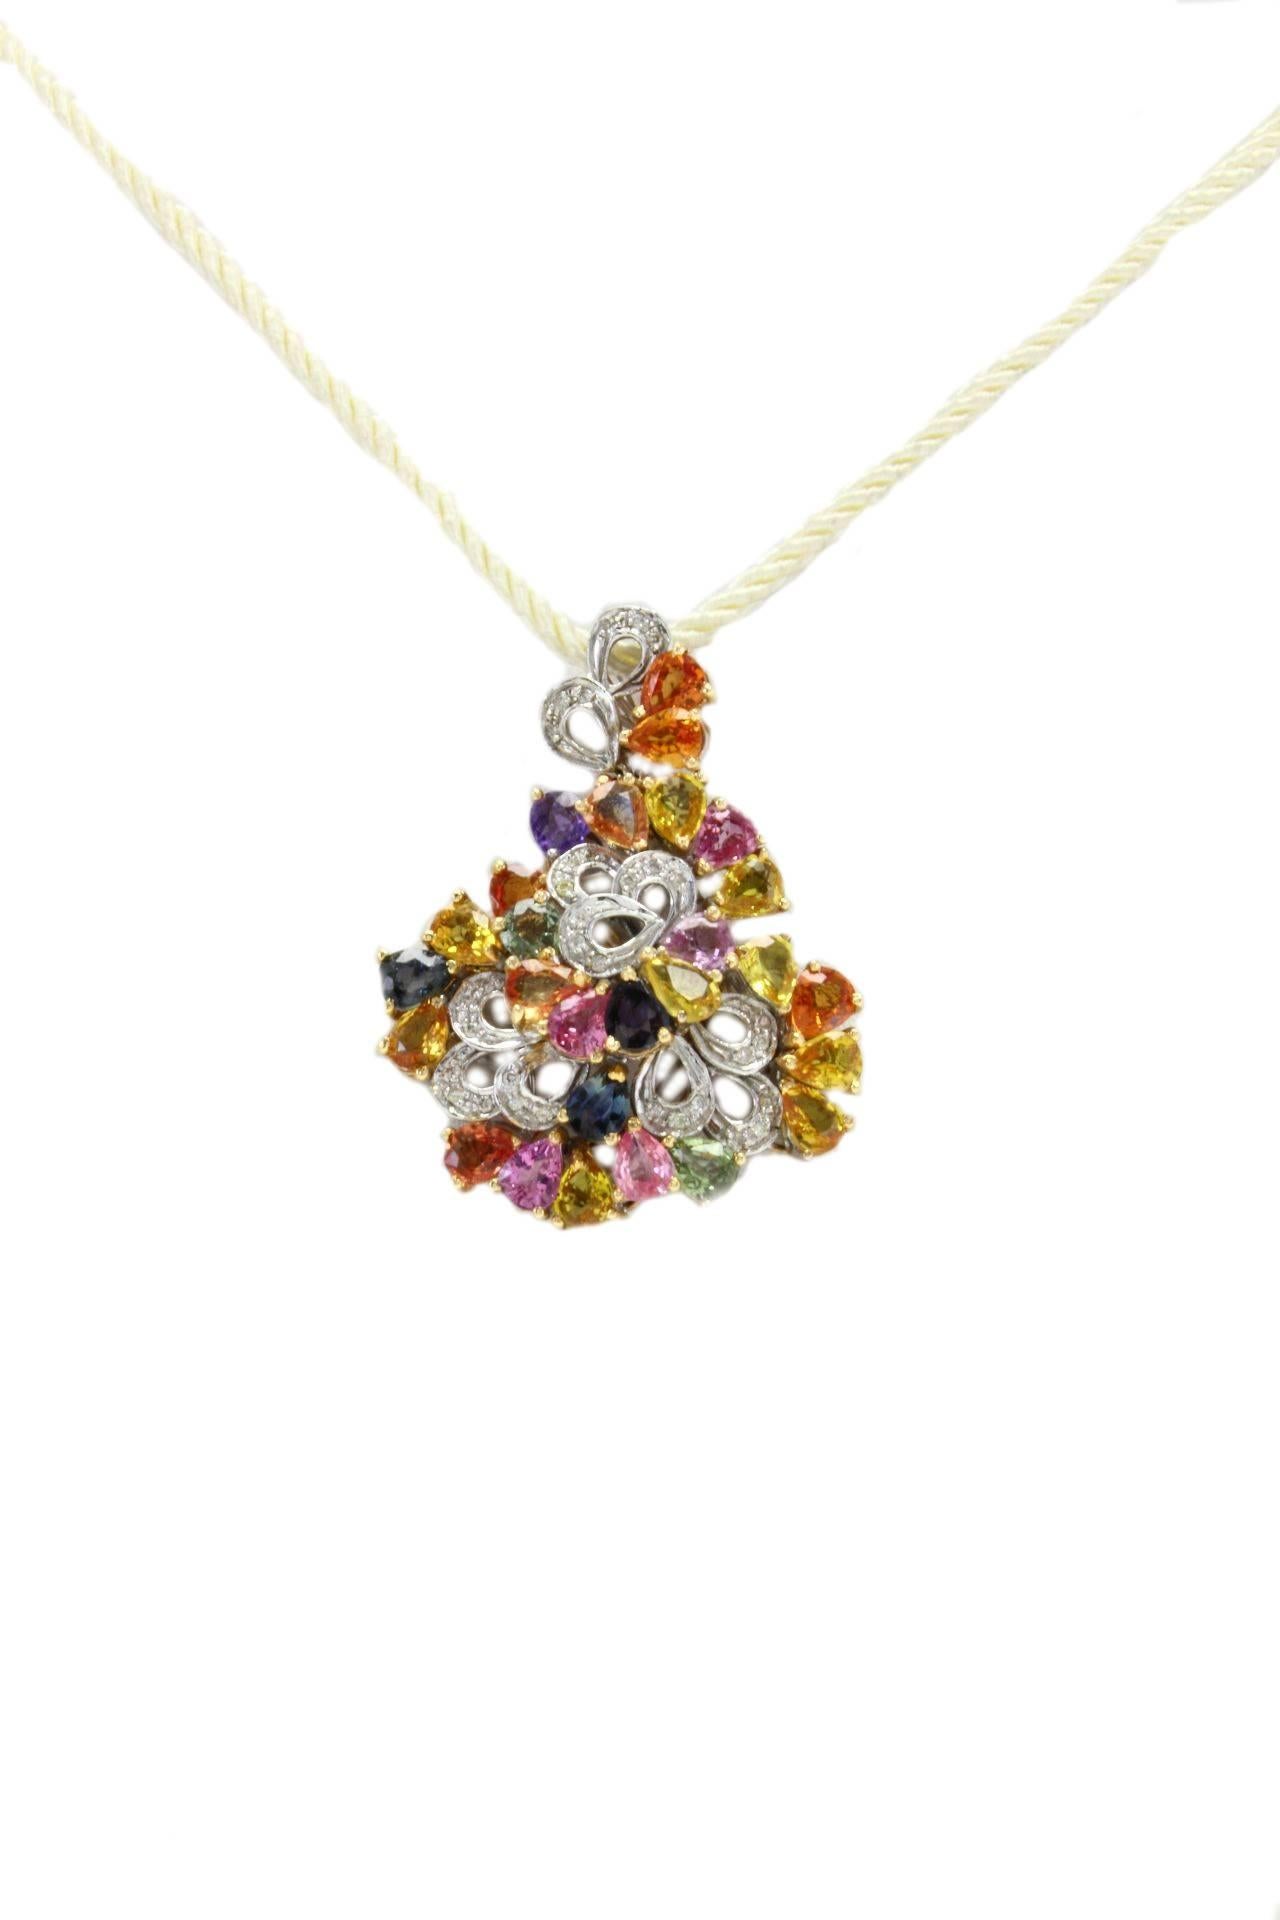 Colorful pendant in 14kt white and yellow gold with diamonds and multicolor sapphires.

Diamonds 0.33 kt
Sapphires 13.16kt
tot weight 11.40gr
c.r. ugfa 

We hereby inform our customers that in the case of return they will not charge any cost about